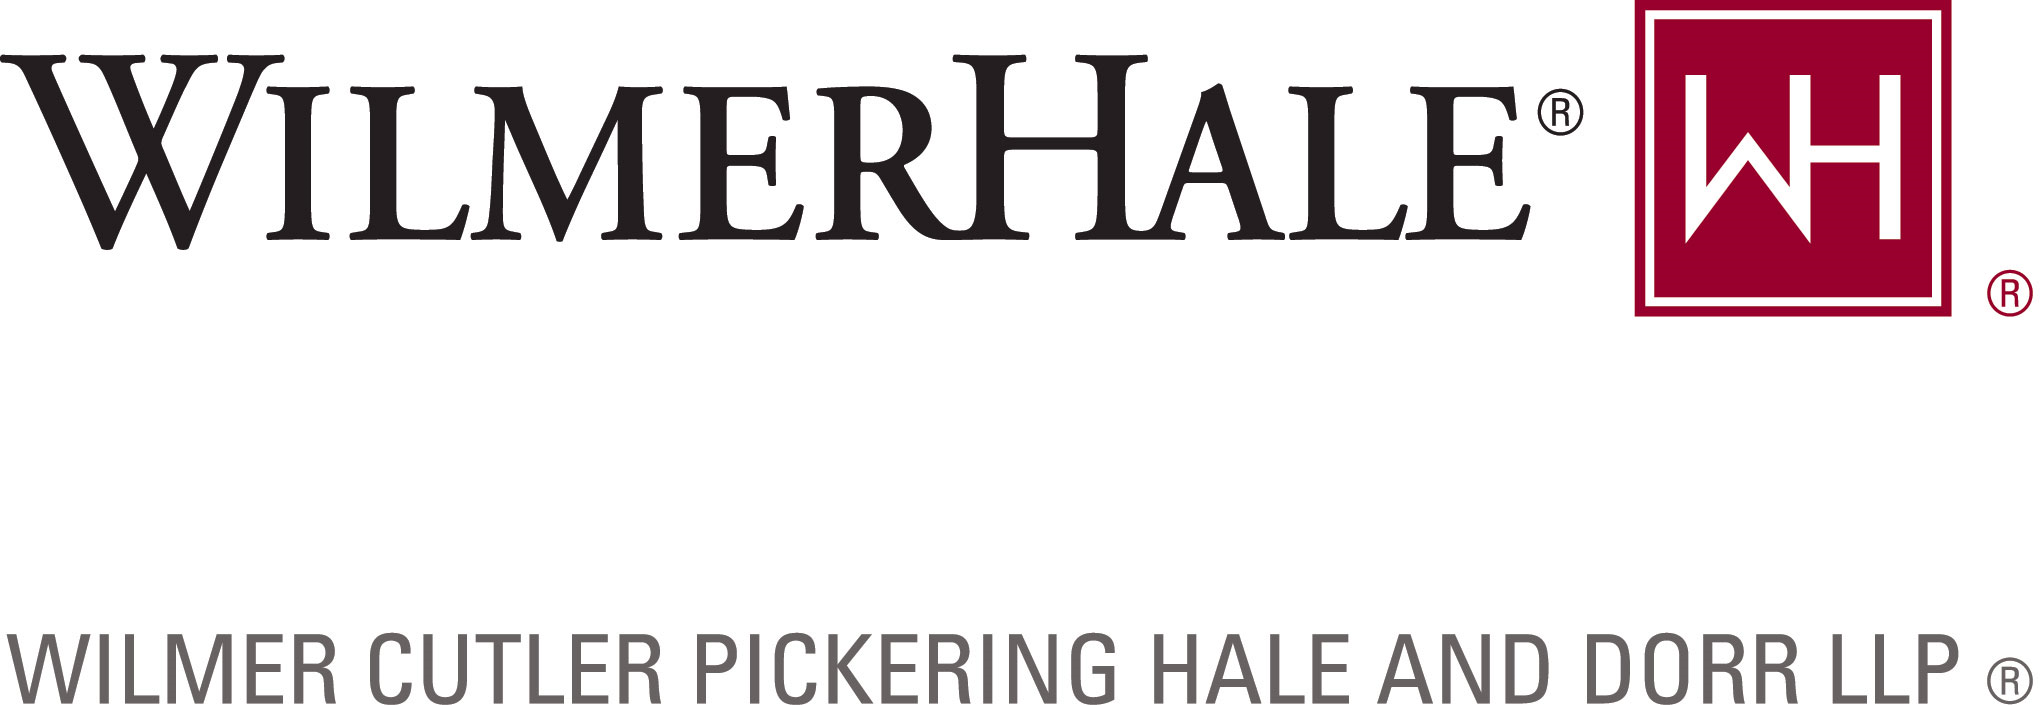 Wilmer Cutler Pickering Hale and Dorr LLP Company Logo